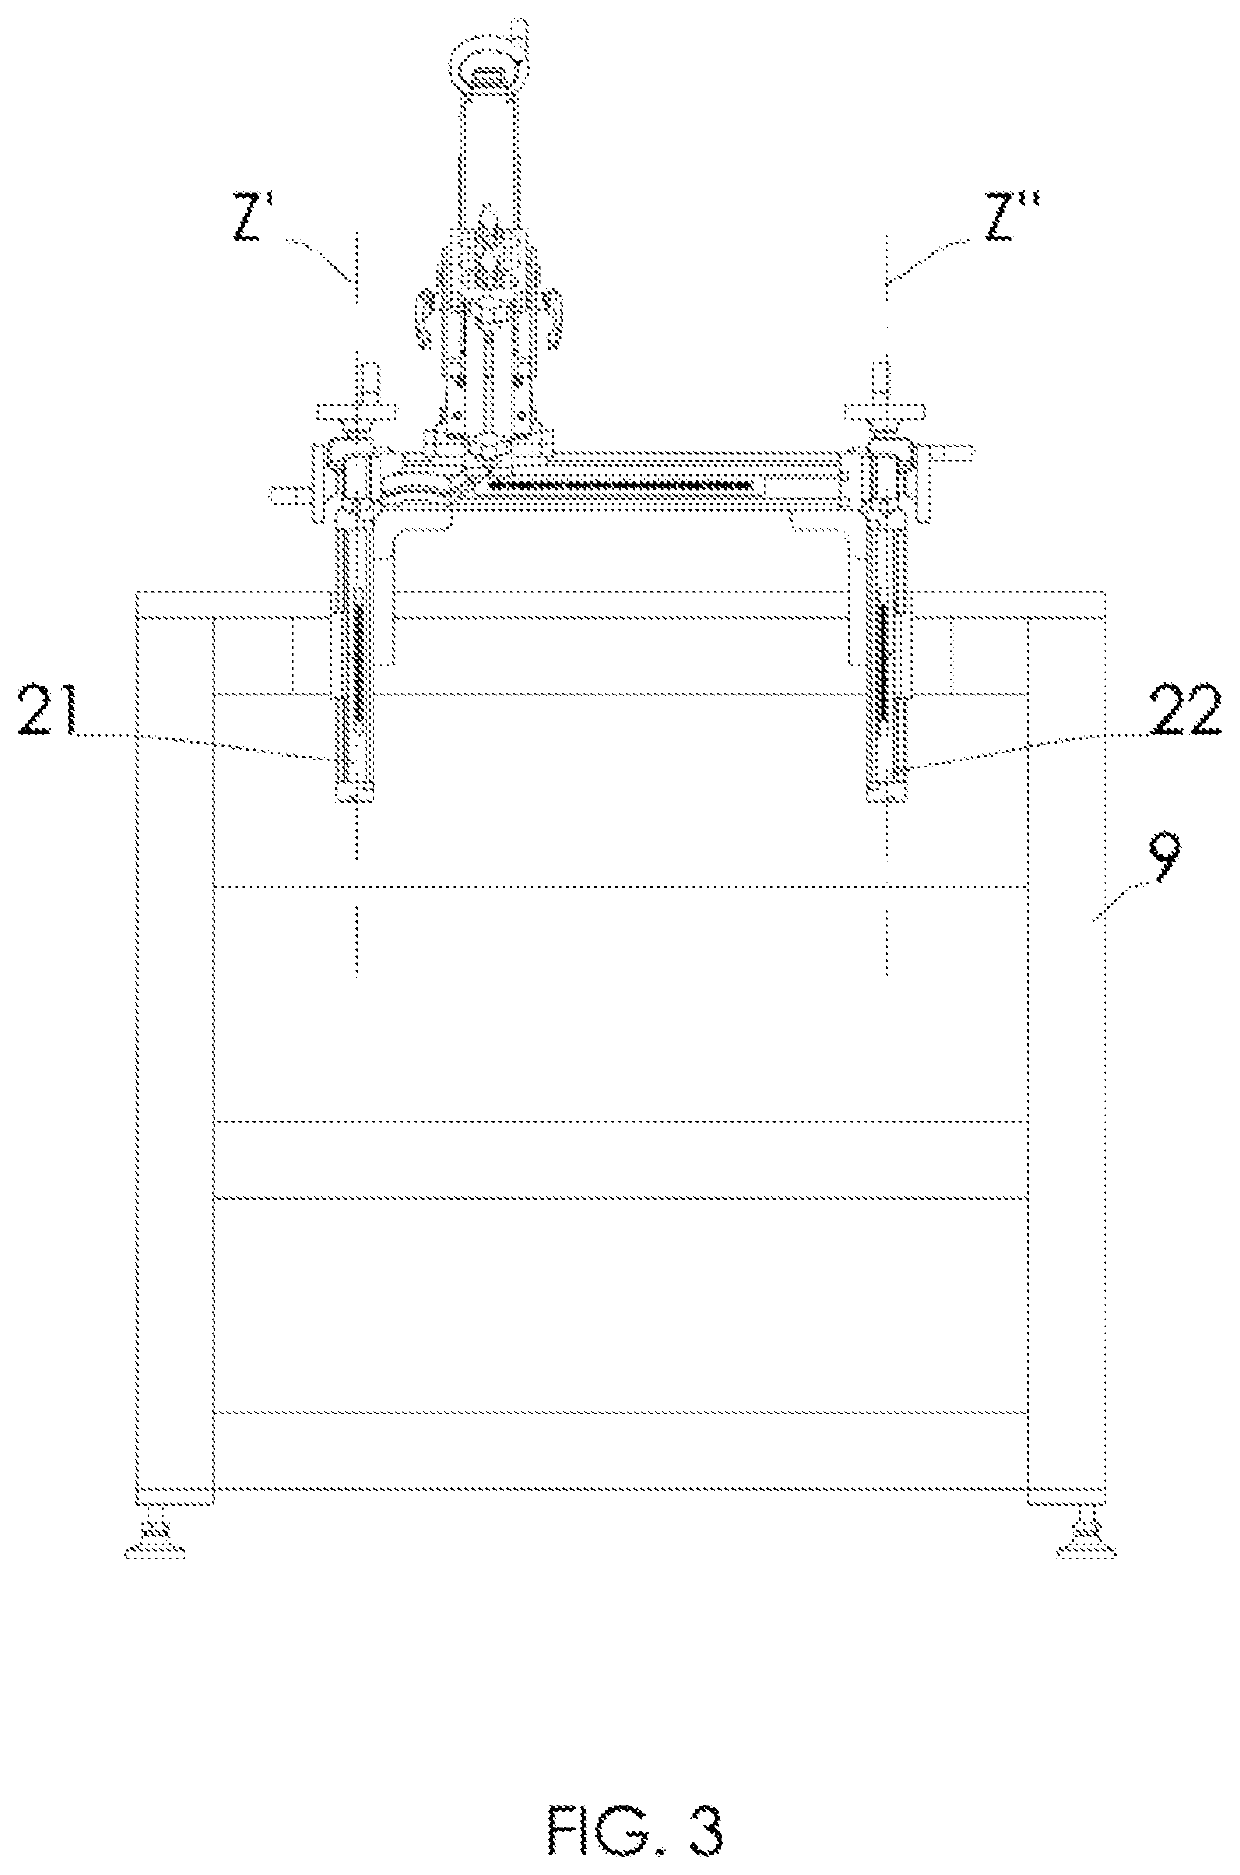 Support, positioning and handling device for surgical equipment and instruments